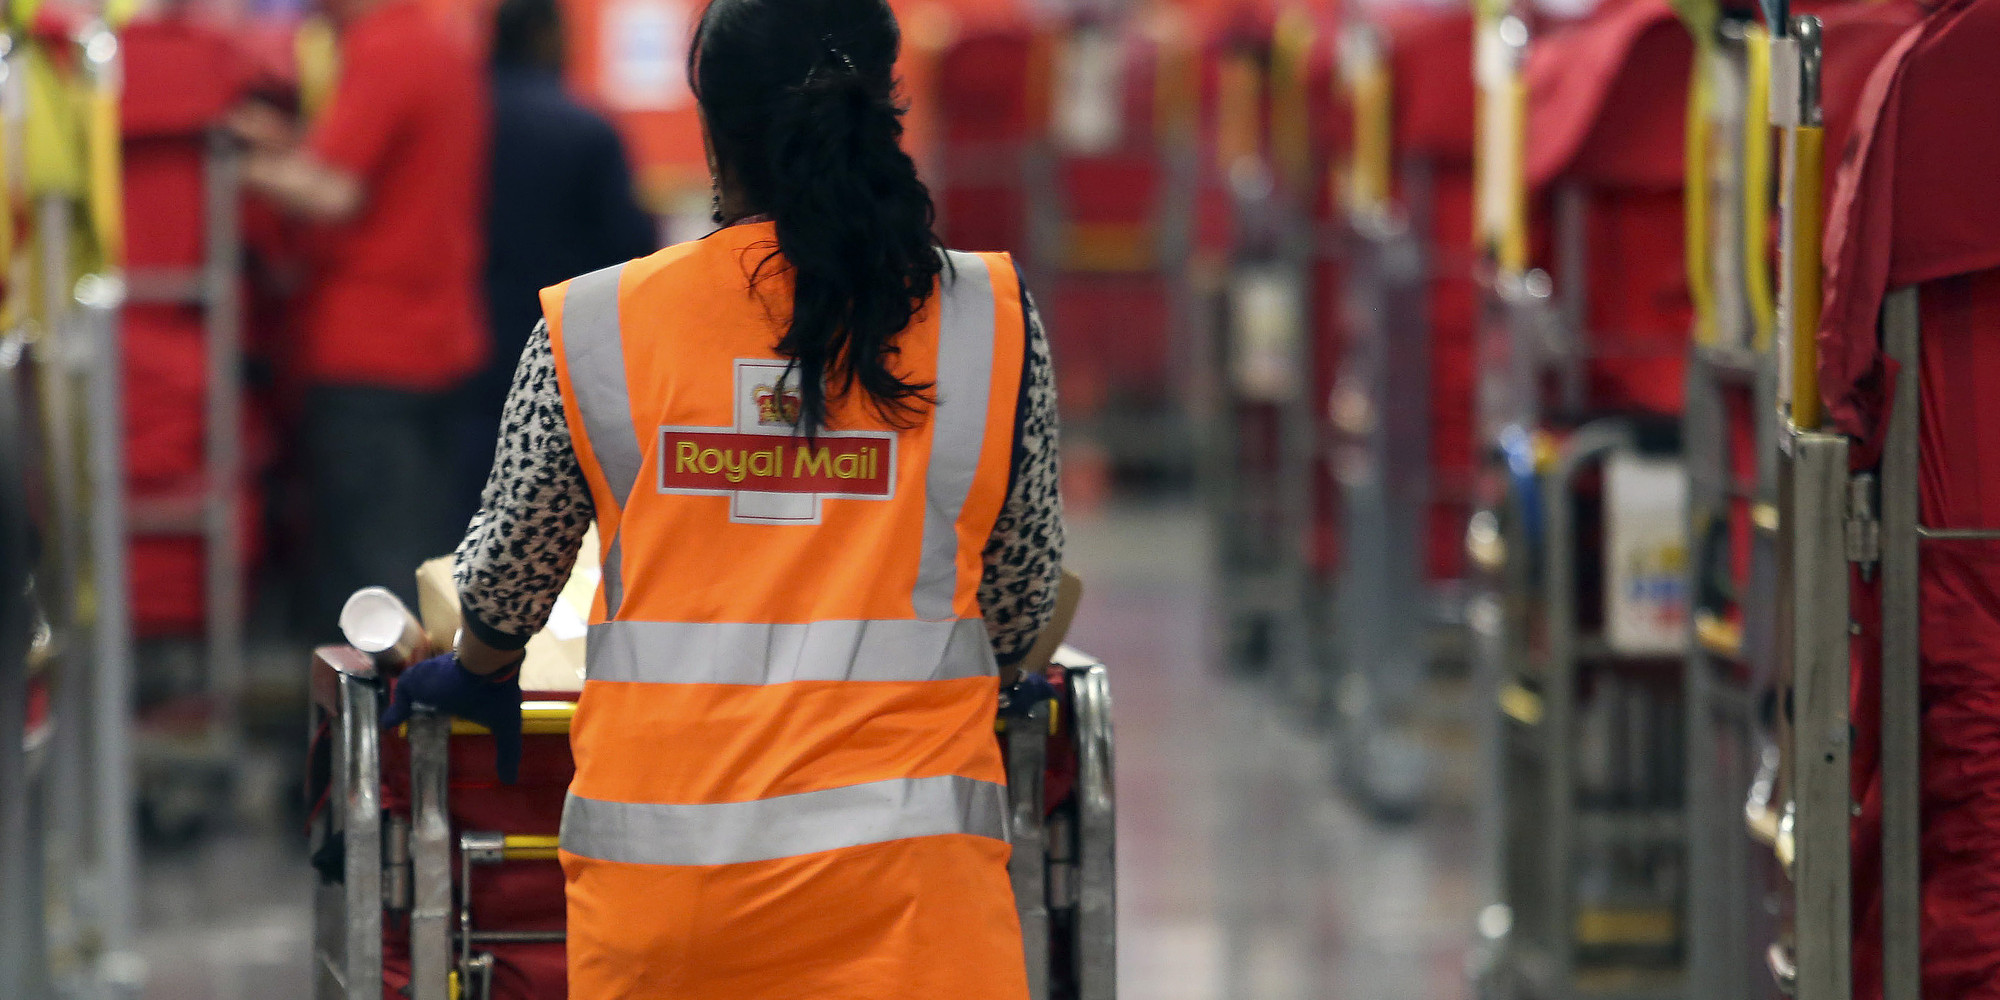 Royal Mail To Cut 1,600 Jobs In Move Branded 'Ruthless' By Unions